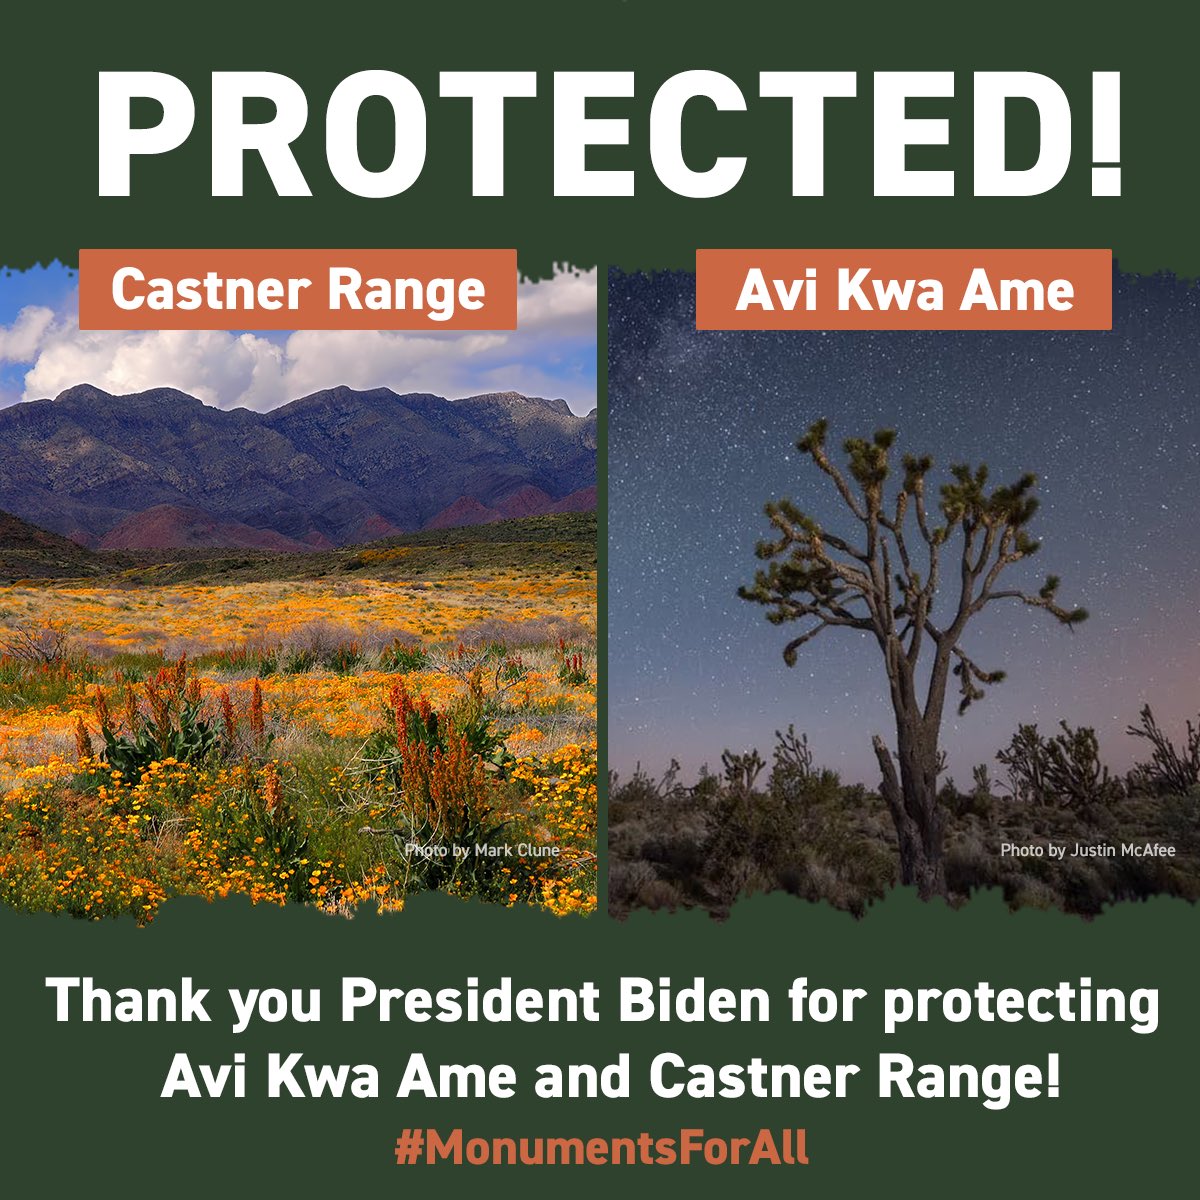 National monuments make sure our connections to nature and our shared history endure for generations to come. Today we're celebrating the one year anniversary of the designations of Avi Kwa Ame & Castner Range national monuments! Keep up the good work, @POTUS! #MonumentsForAll